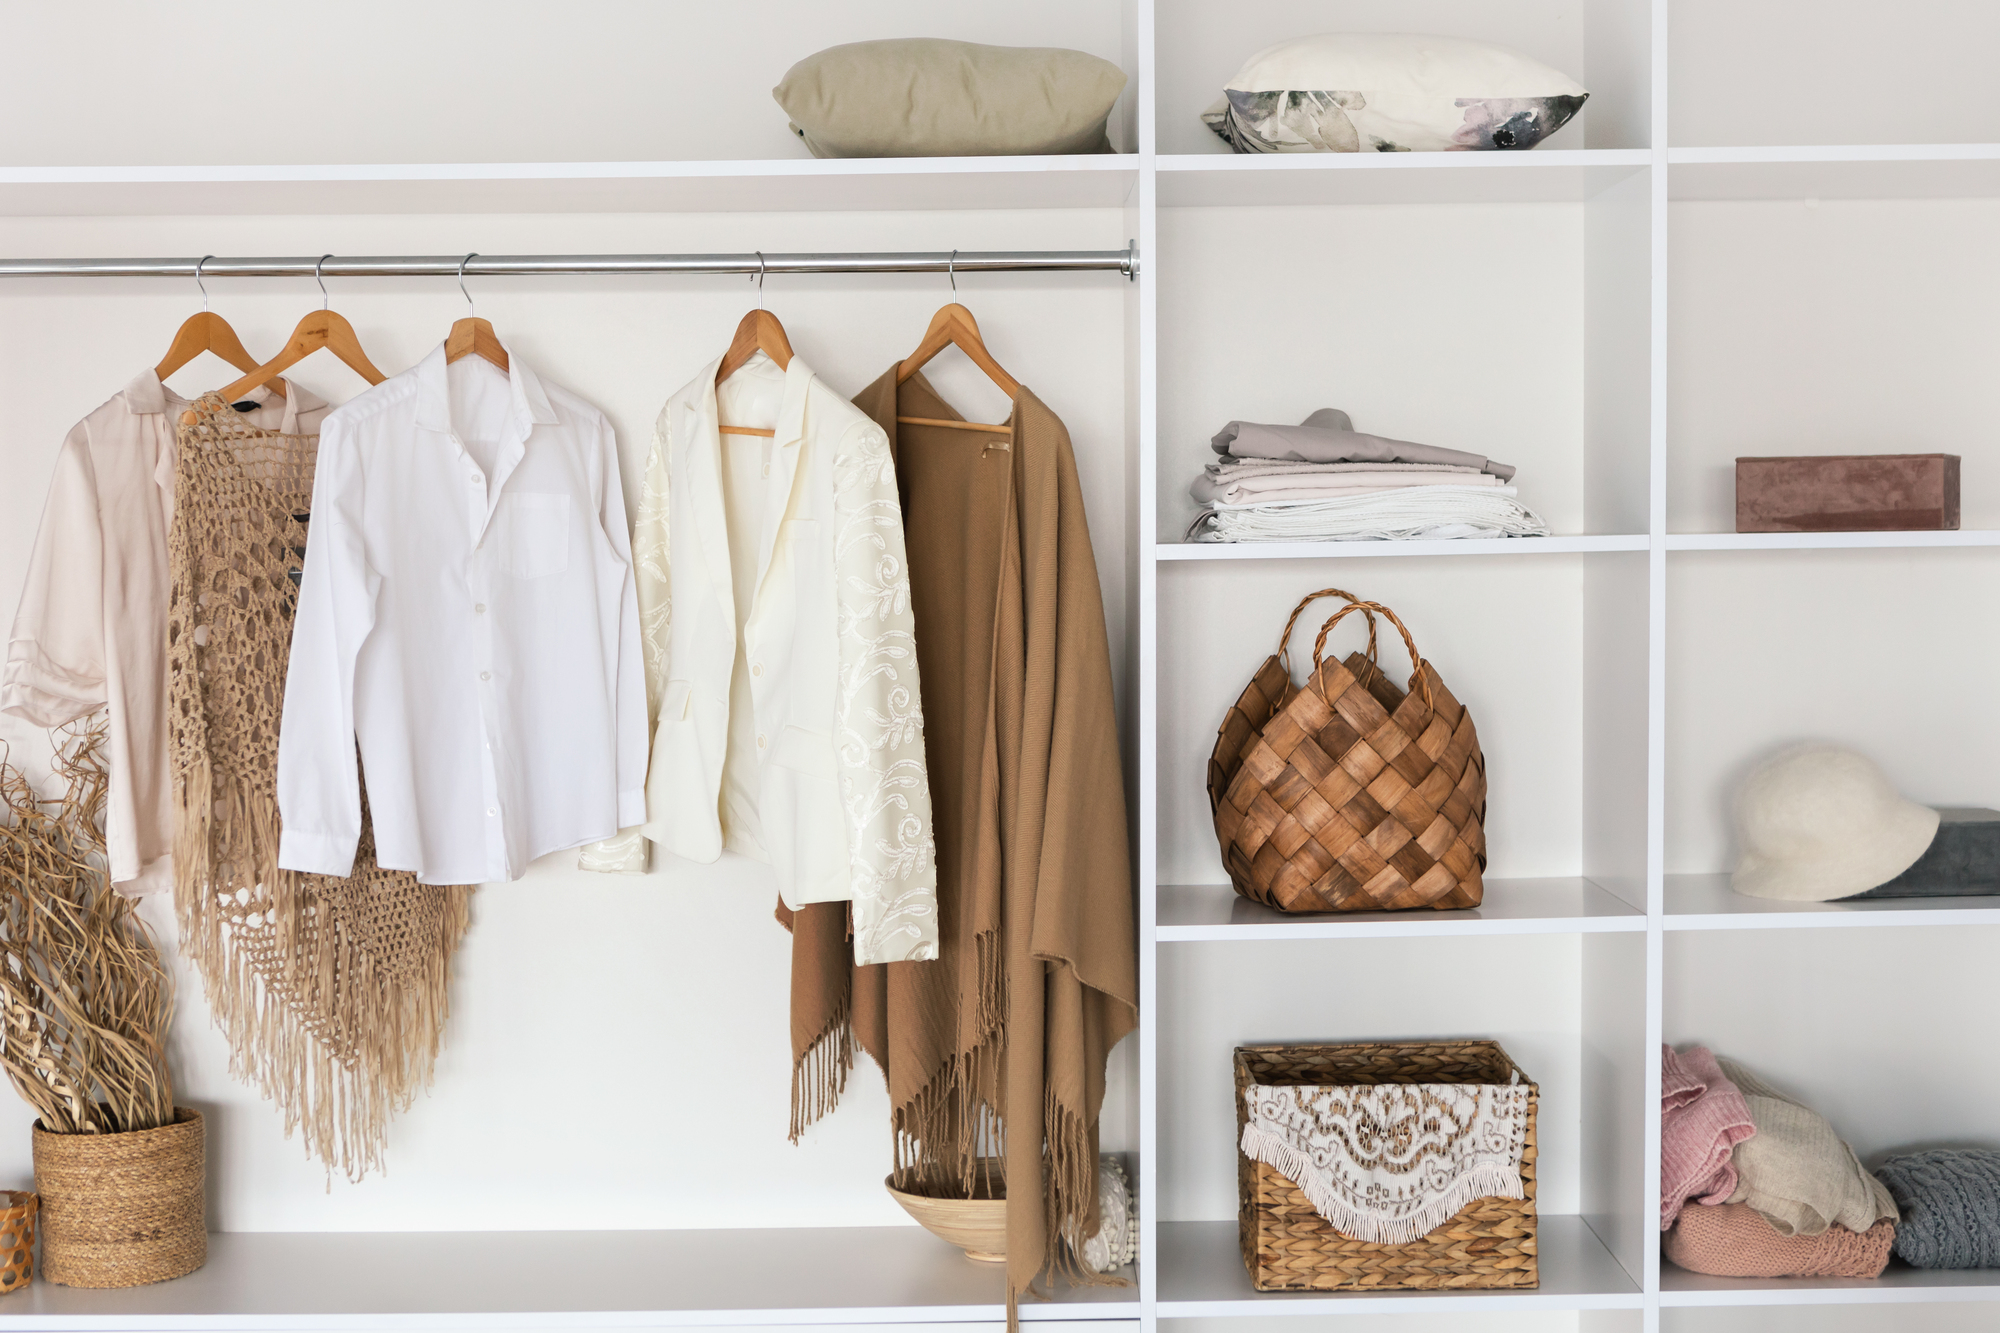 Interior Of Spacious Wardrobe Room Full Of Female Clothes Hanging On Hangers And Accessories On Shelves Indoor. Closet With Trendy Outfits. Fashion Background, Modern Interiors Design. No People